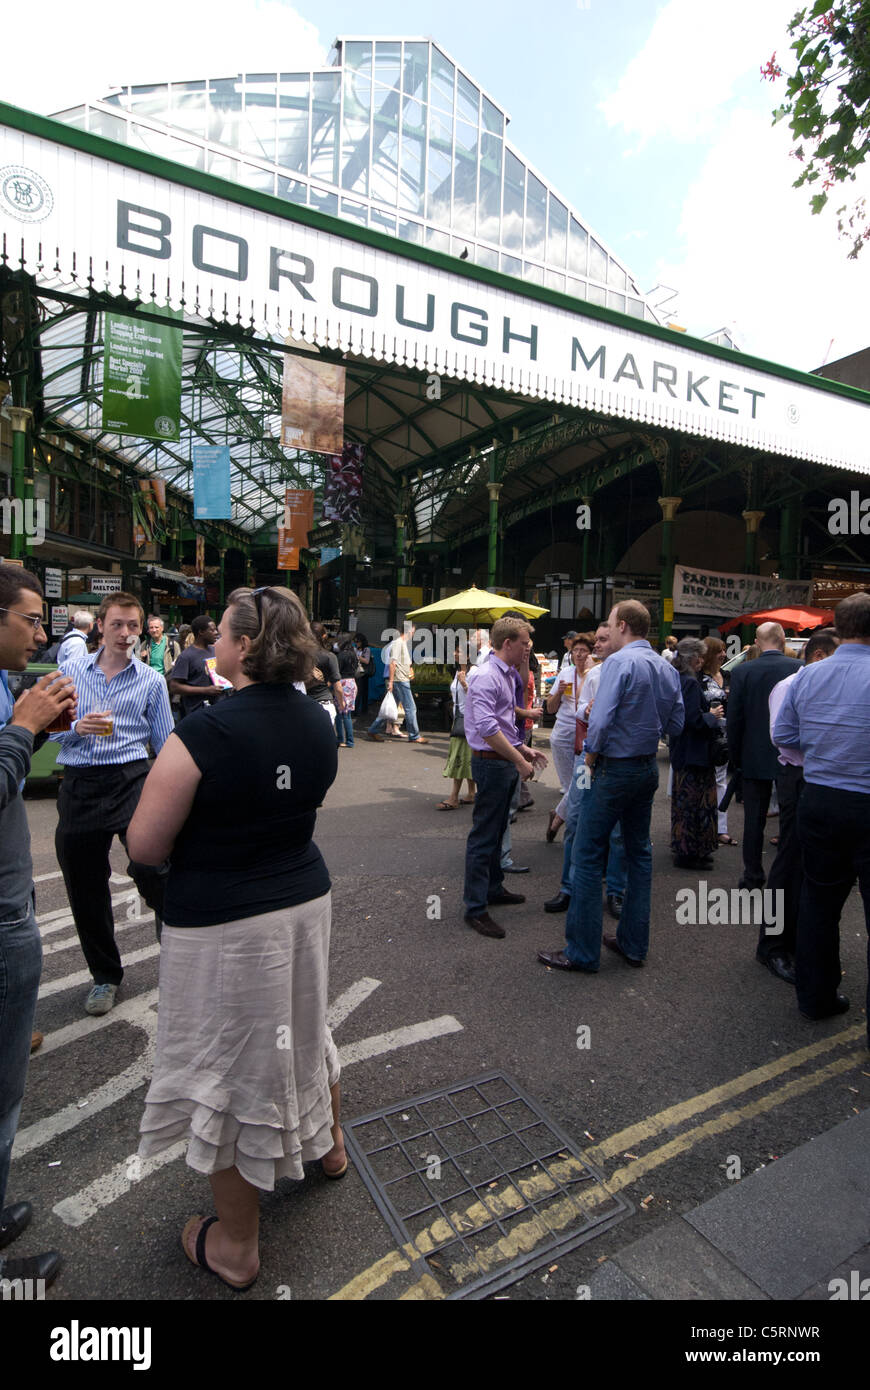 Borough market lunchtime drinkers Stock Photo